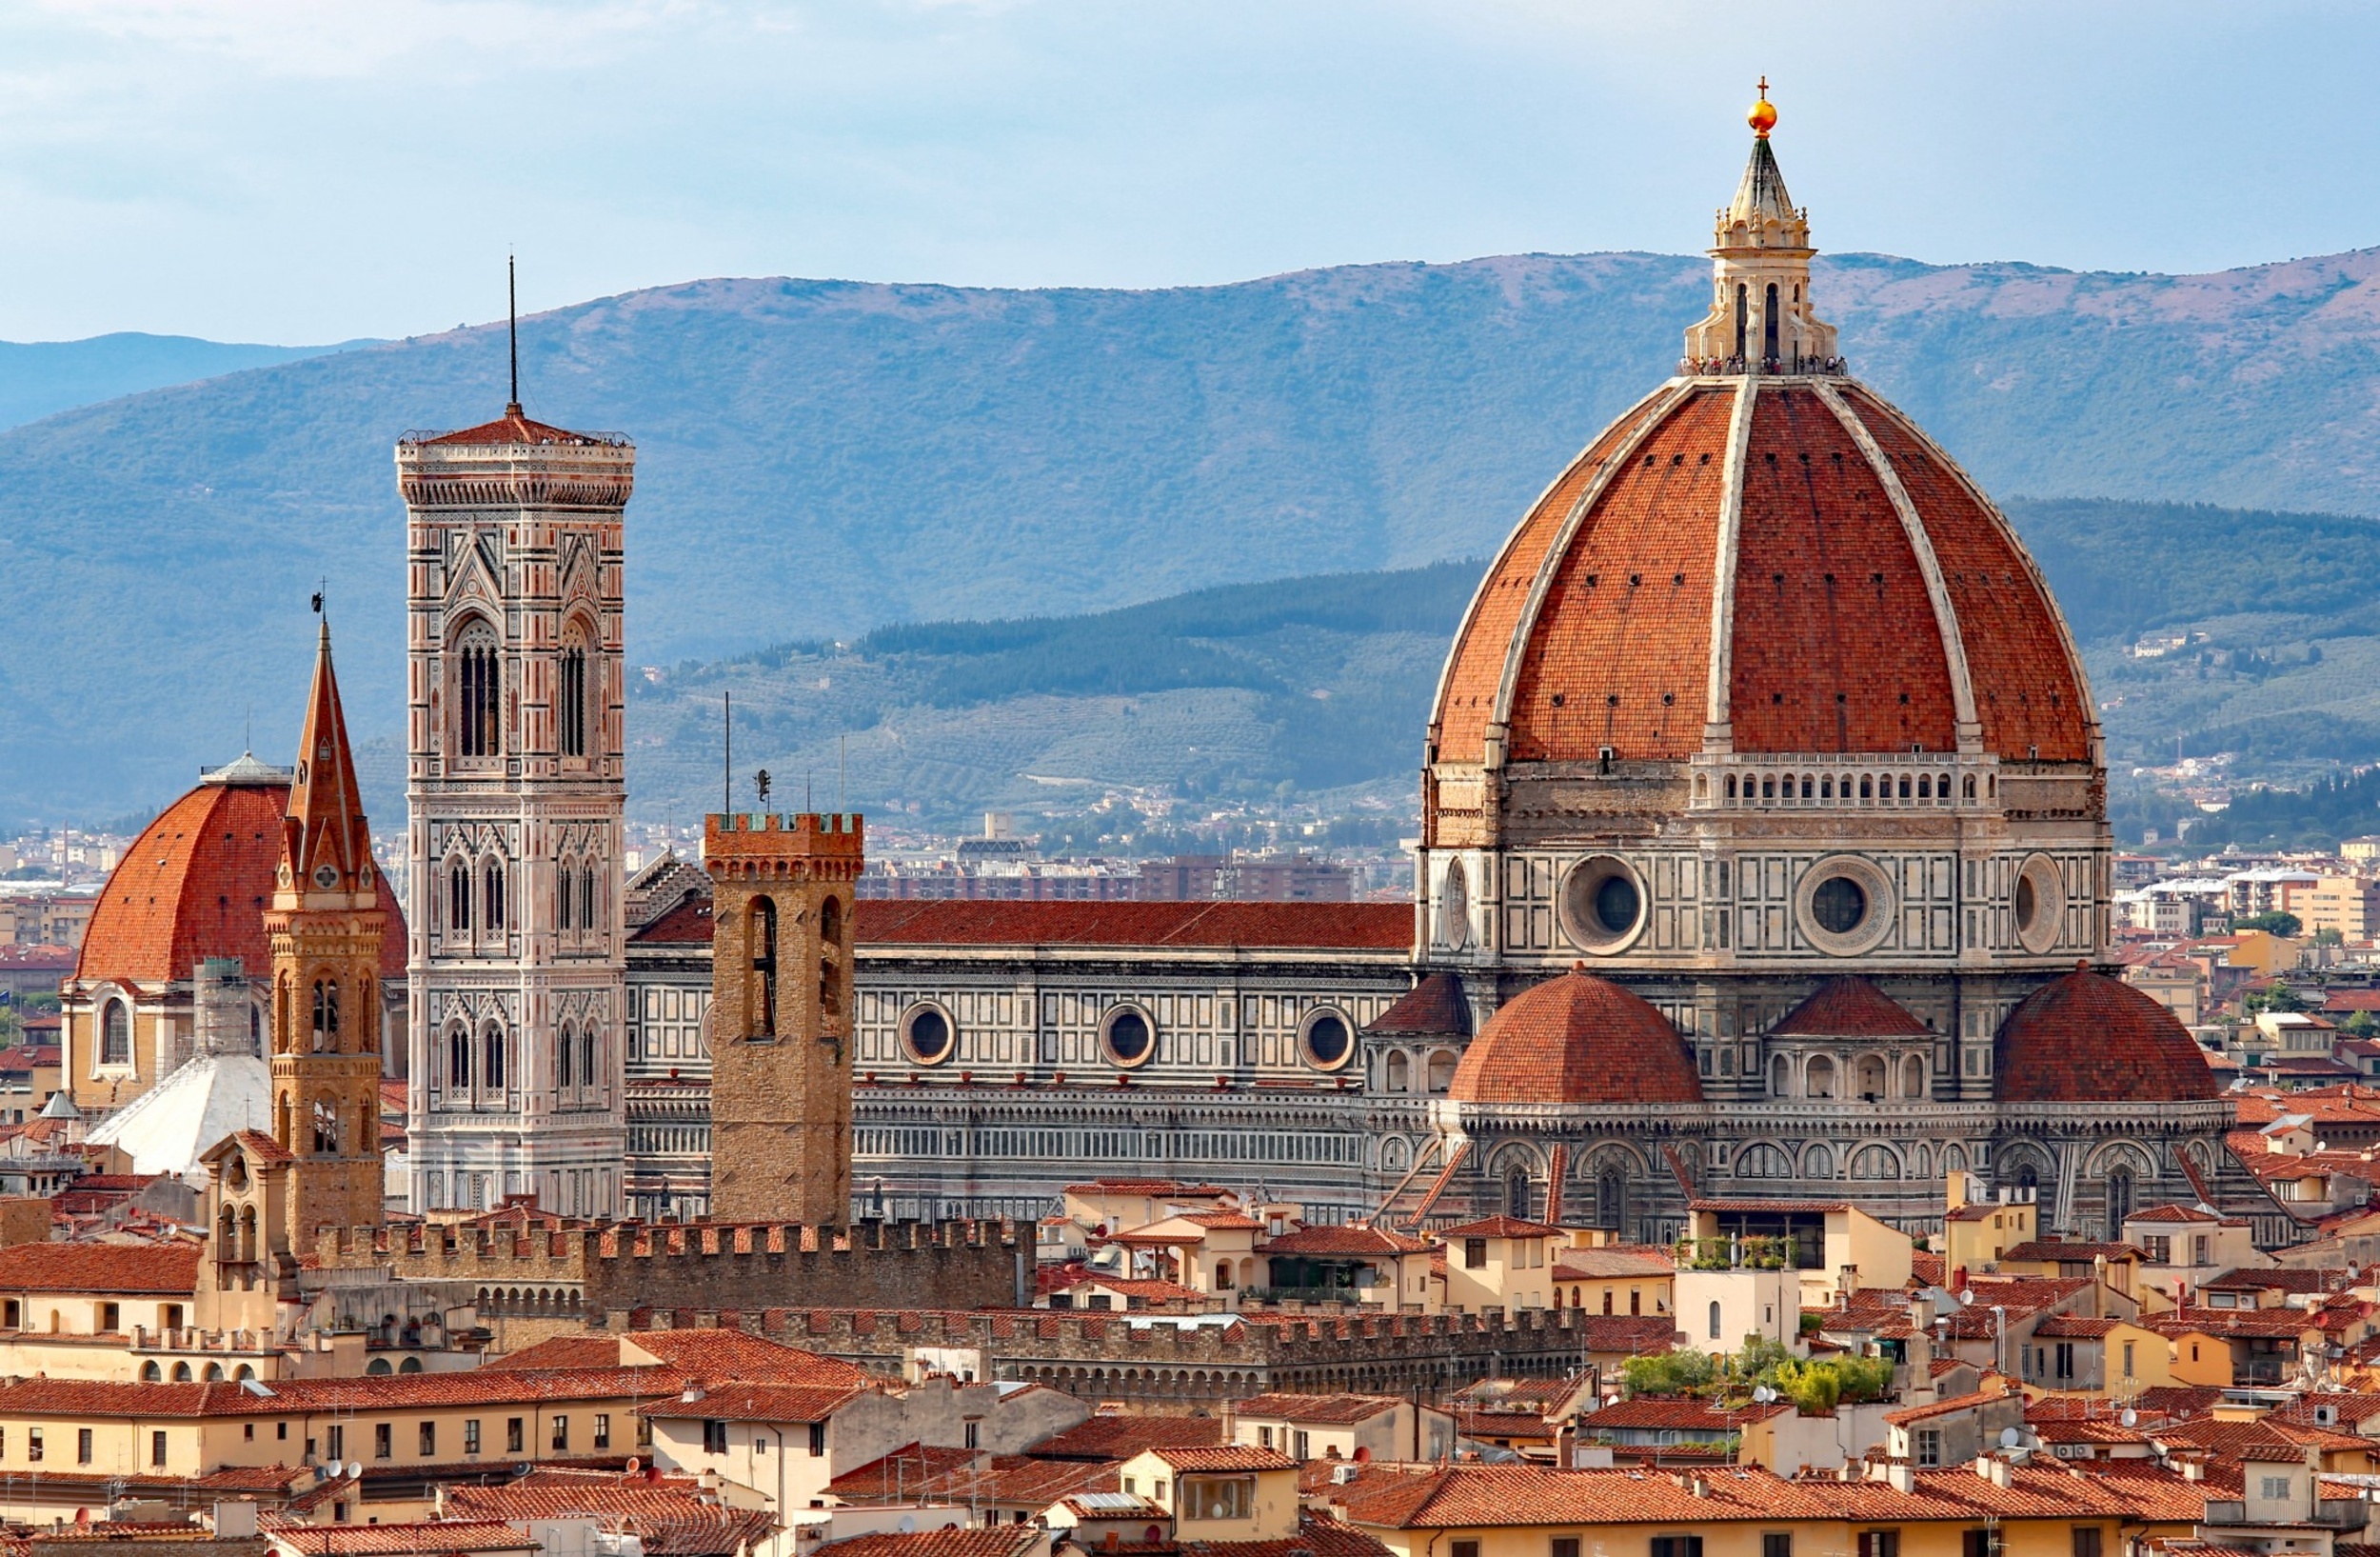 15 things you must do in Florence, Italy